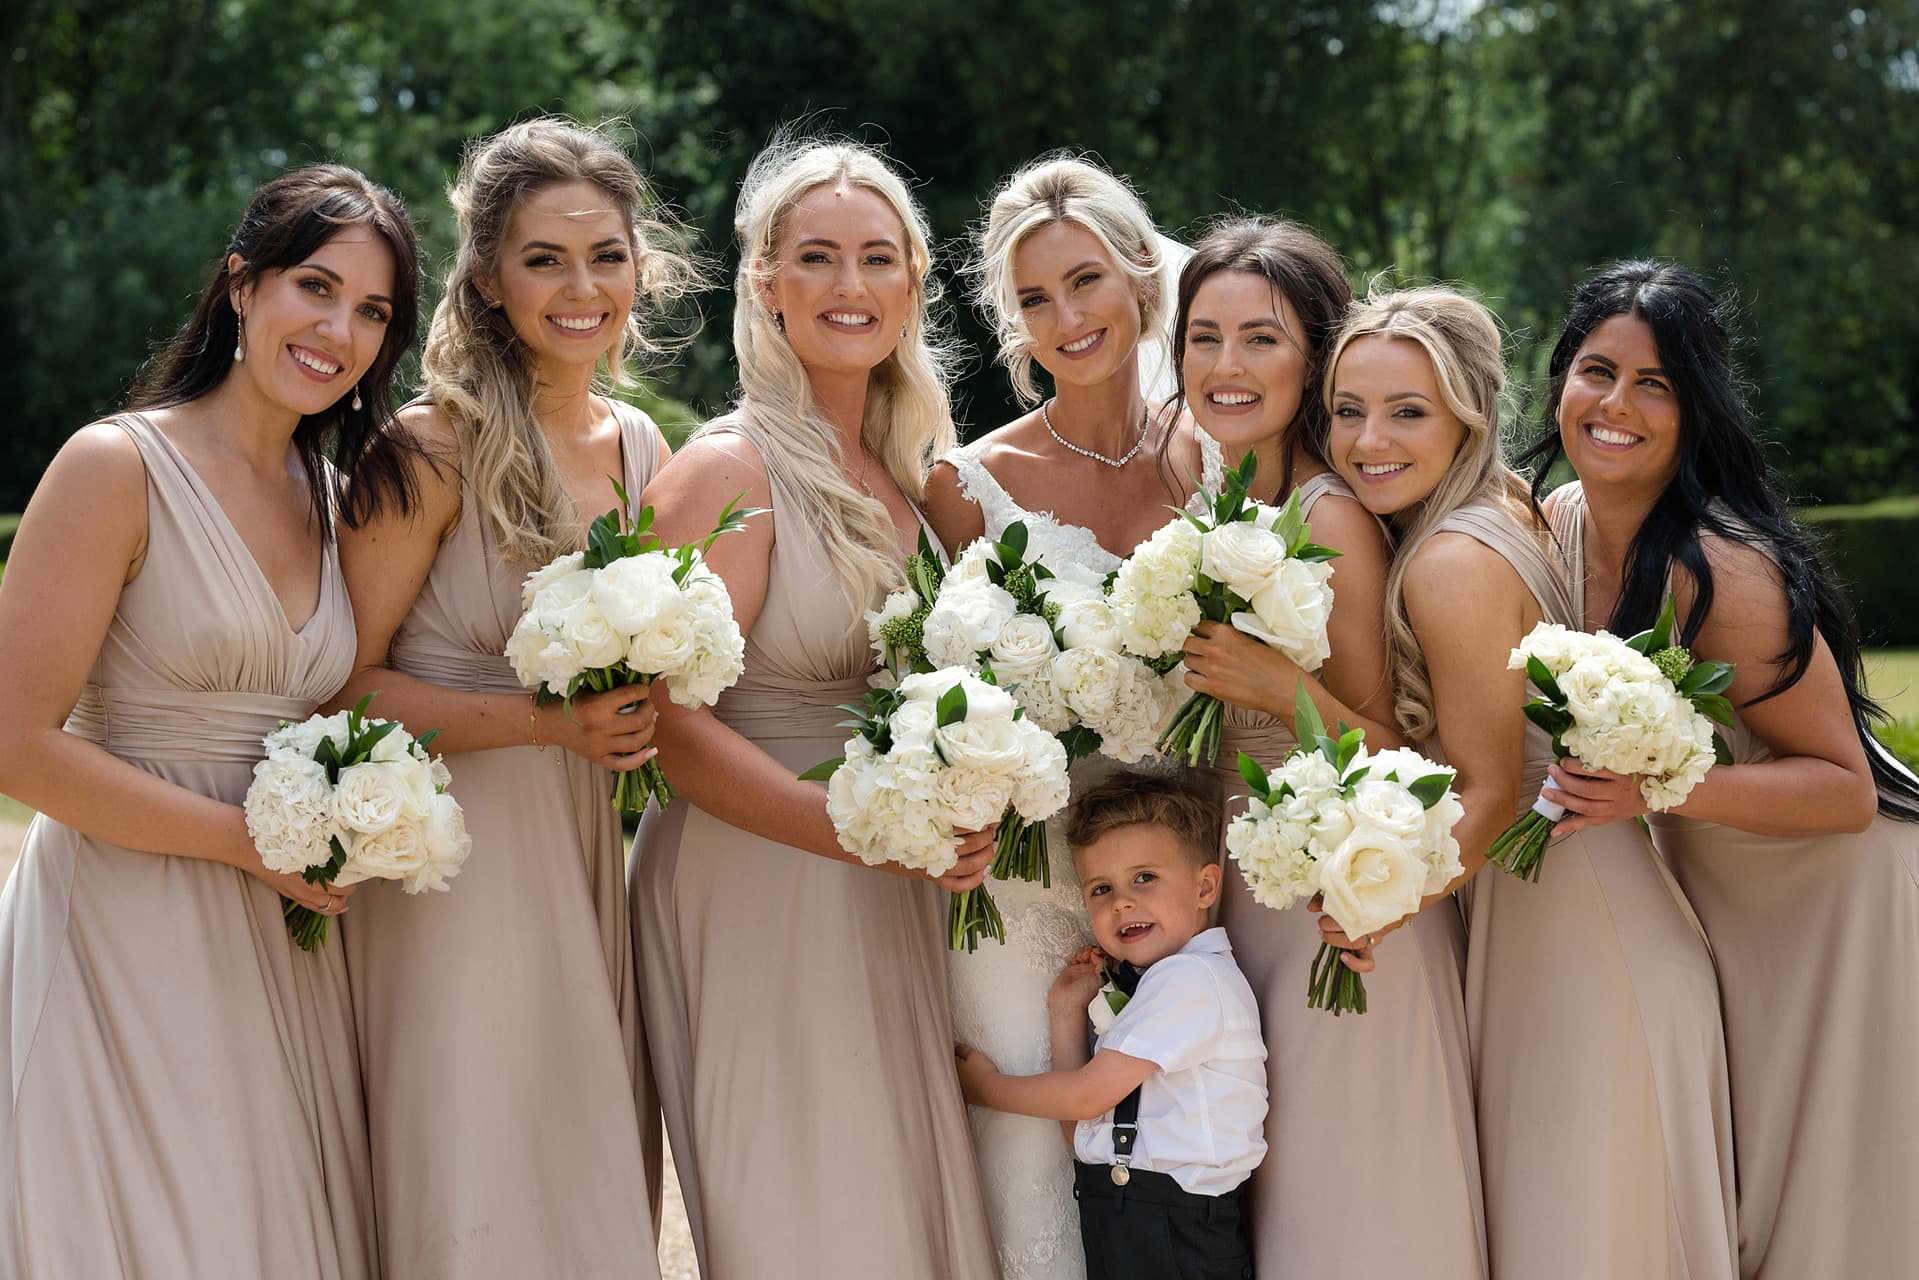 Group photo of bride and her bridesmaids